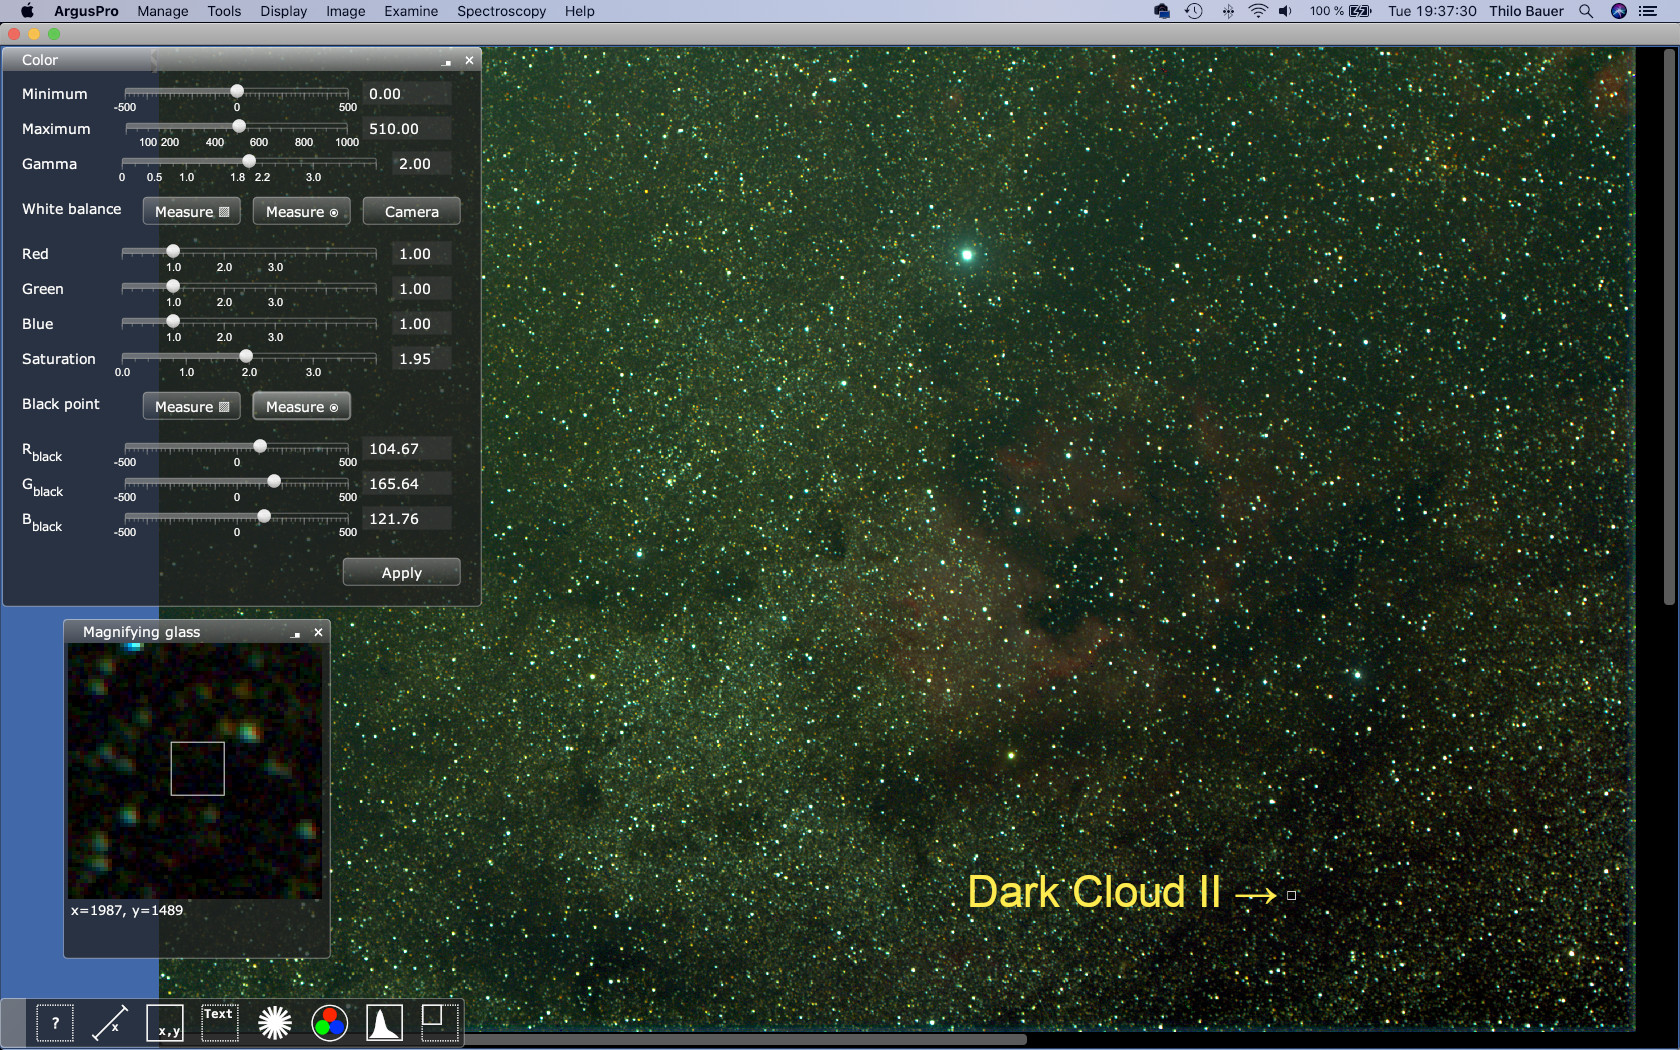 Figure 2: Result from using the dark cloud close II to NGC 7000 revealed fainter structures of the nebula and the surrounding faint stars in the field. The measured RGB values are lower compared to the previous measures from dark cloud I. The image appears brighter overall, because the sky background found in this cloud was found lower. Also note, there is a slight difference in color appearance when comparing this image with the previous one.